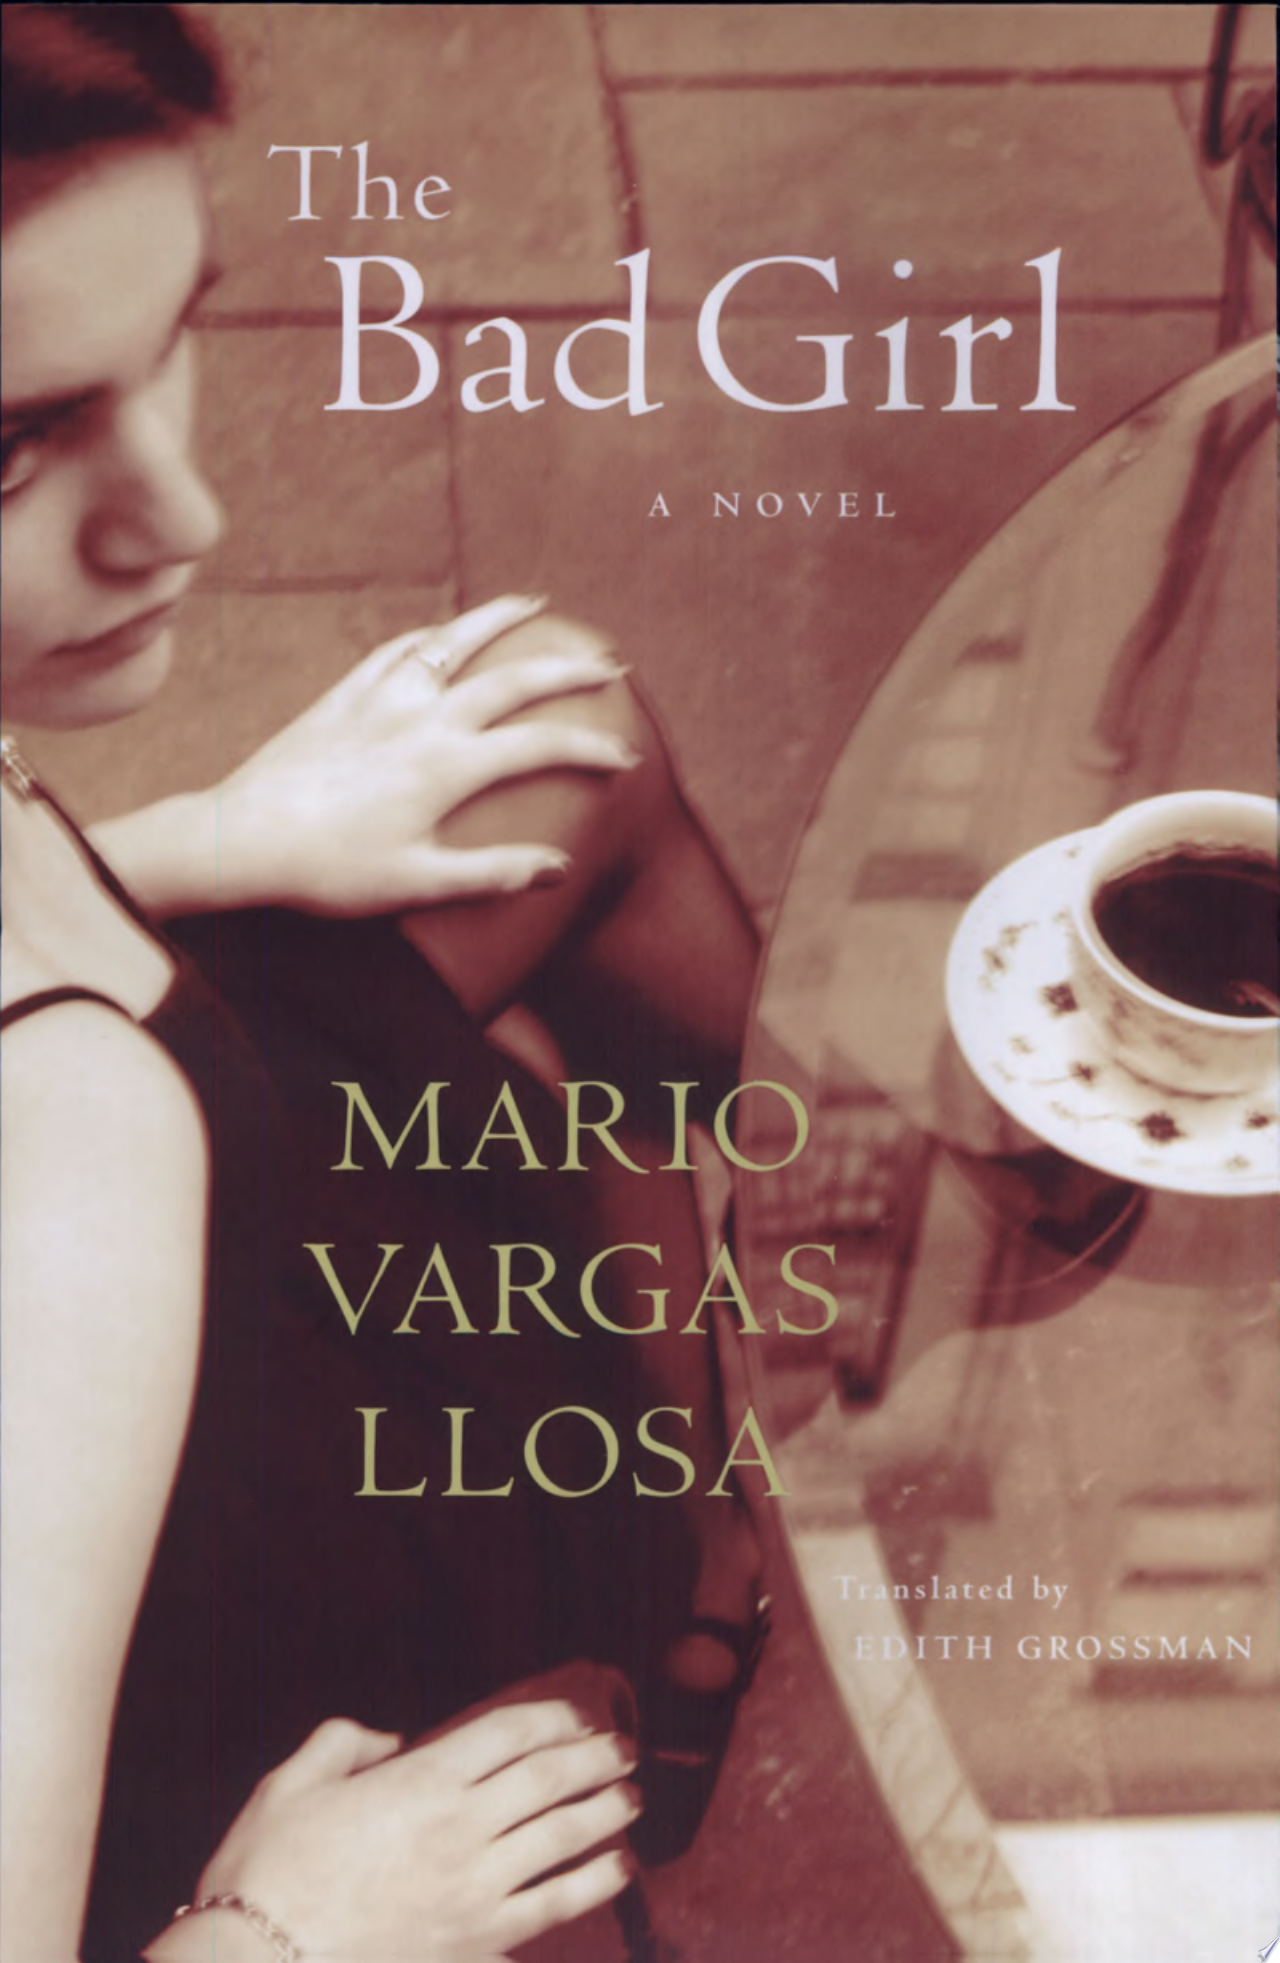 Image for "The Bad Girl"